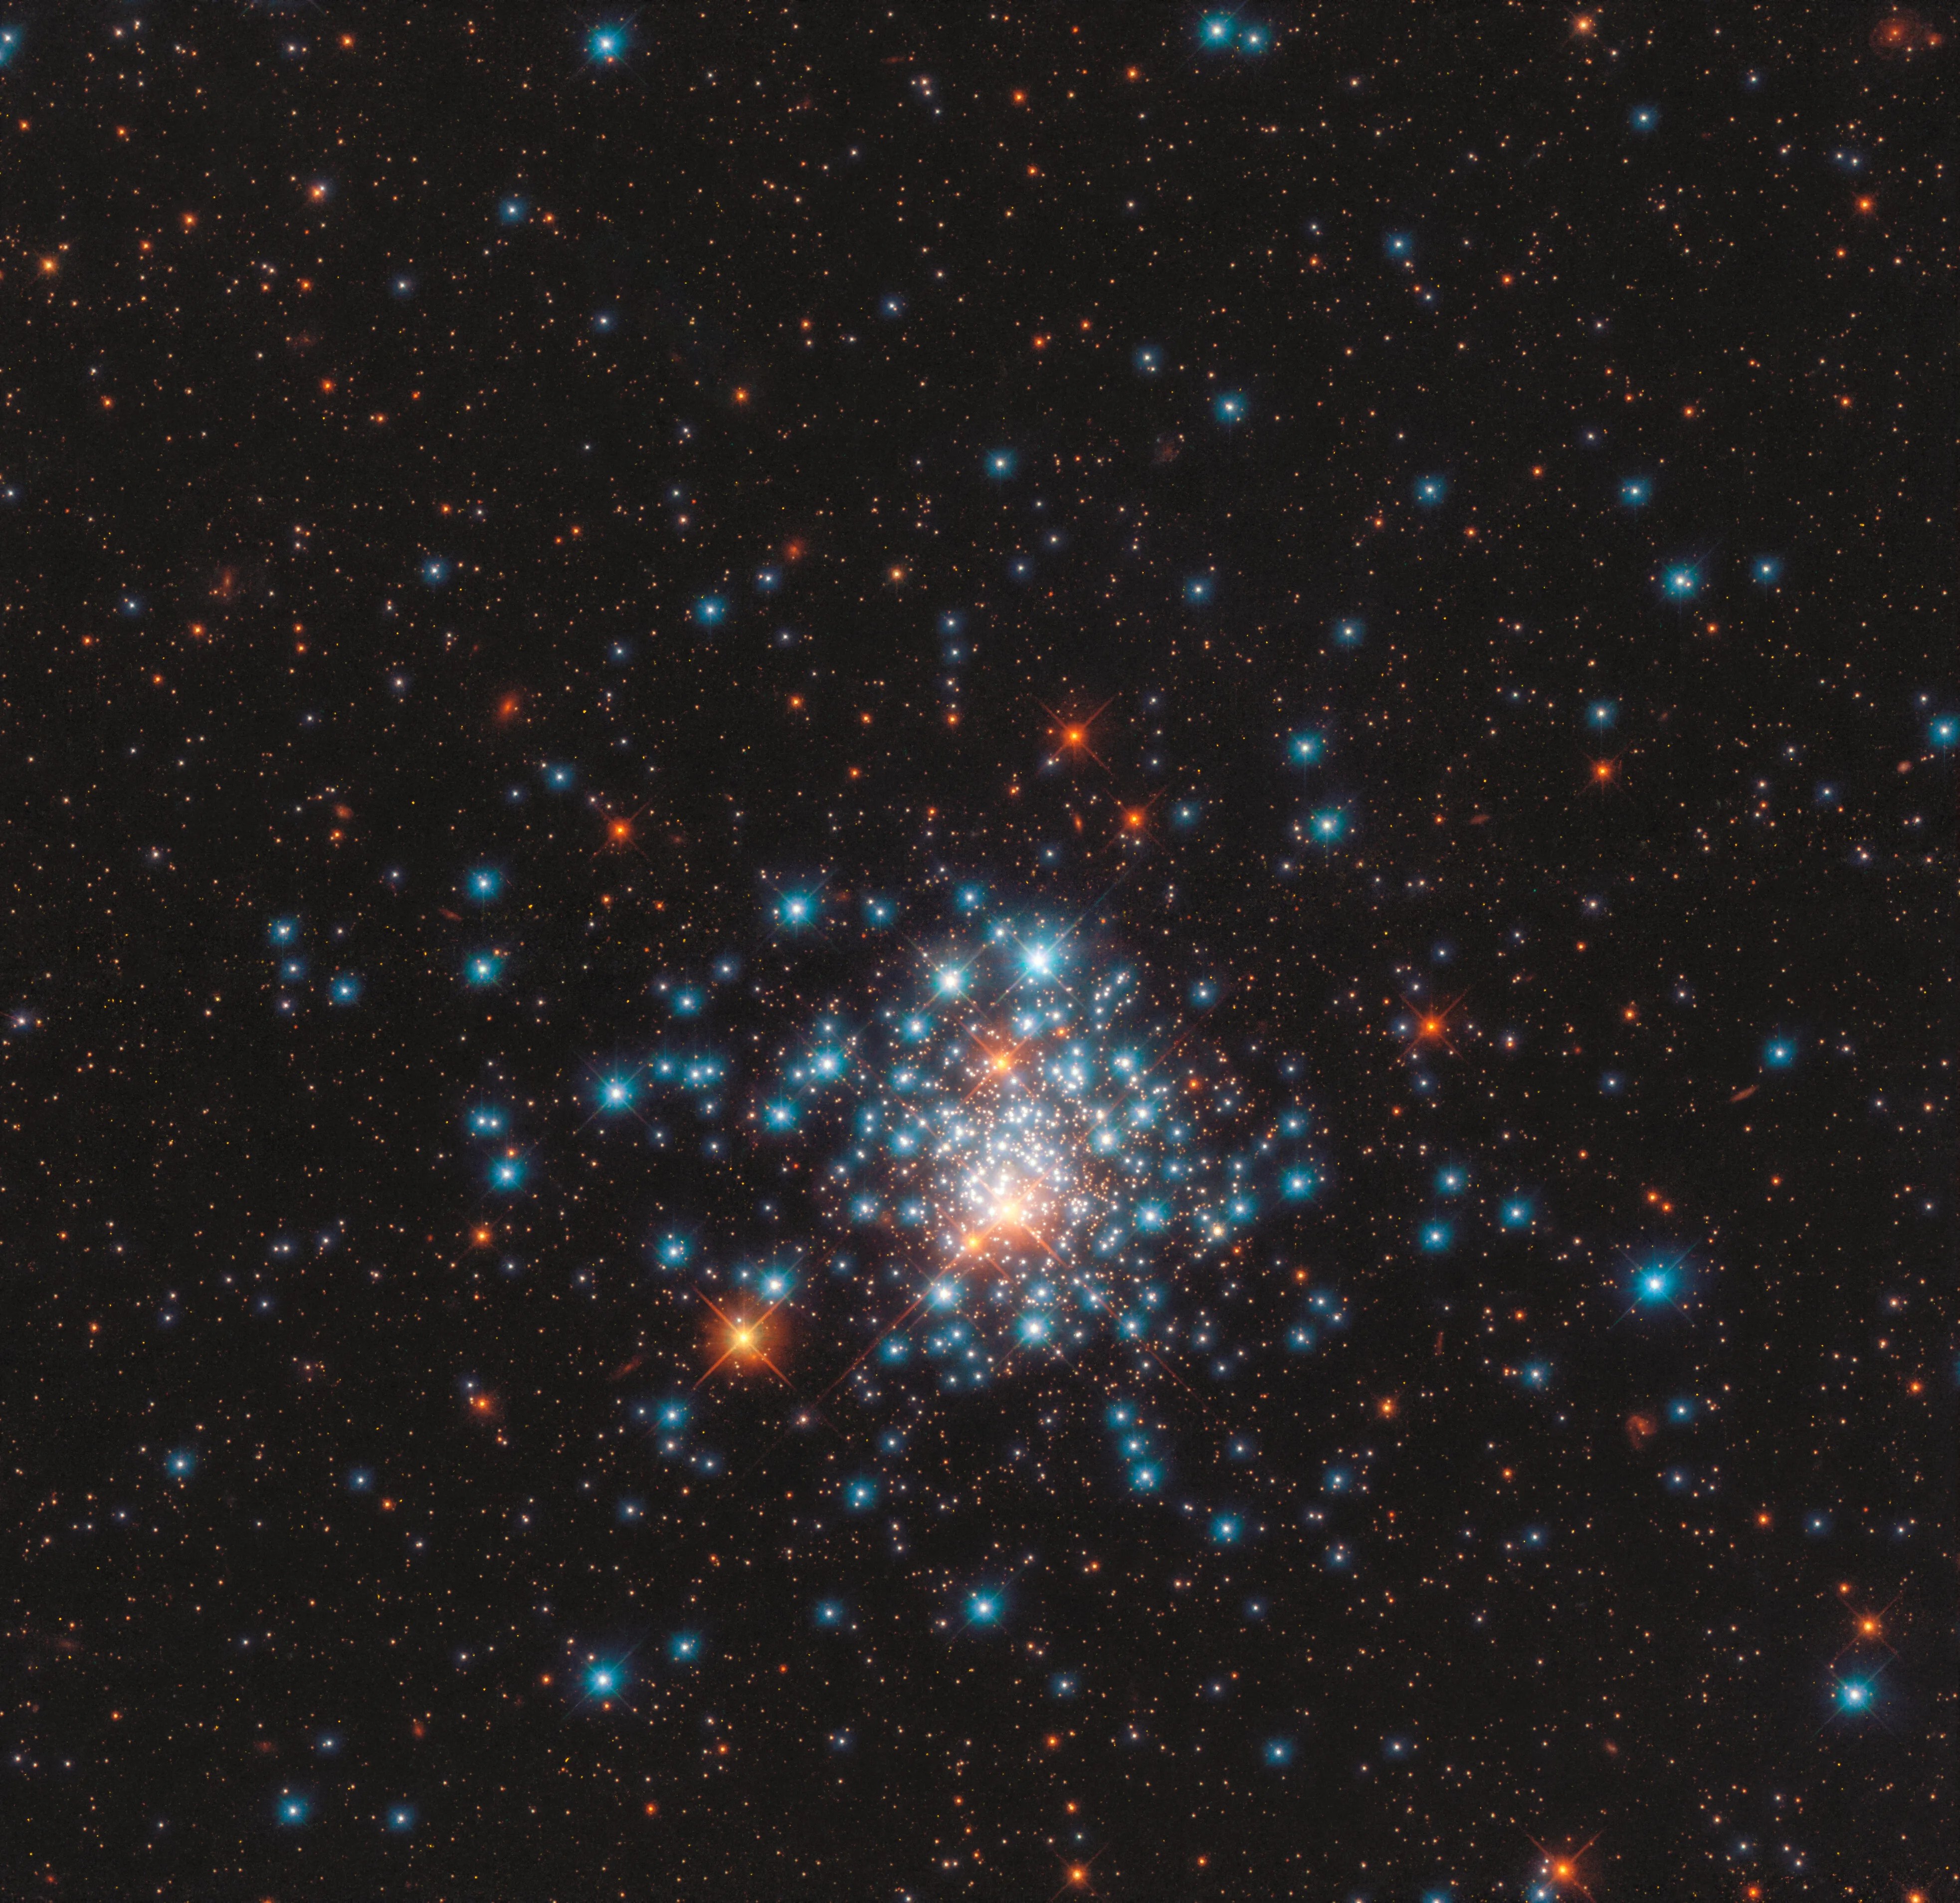 Cluster of blue- and red-hued stars against the black backdrop of space